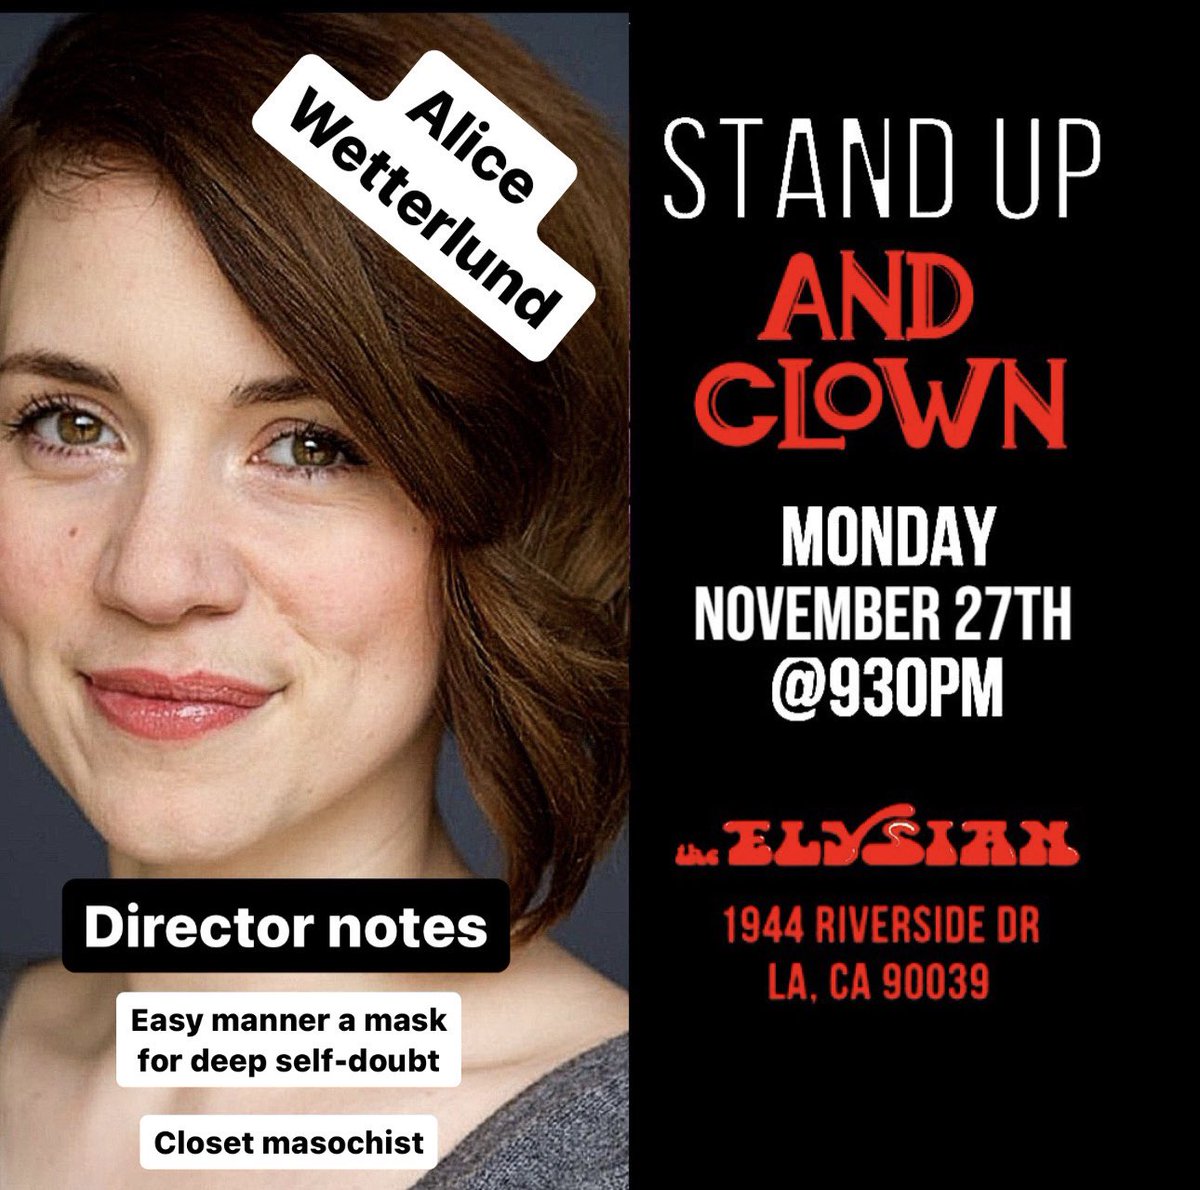 TONIGHT! STAND UP AND CLOWN 930pm @ElysianTheater Clown master Chad Damiani live directs comics through their first clown show. Come see stand-ups learn the joy of suffering for art 🤡 @eddiepepitone @alicewetterlund @HannahPilkes @emilybrowntown elysiantheater.com/shows/standupa…